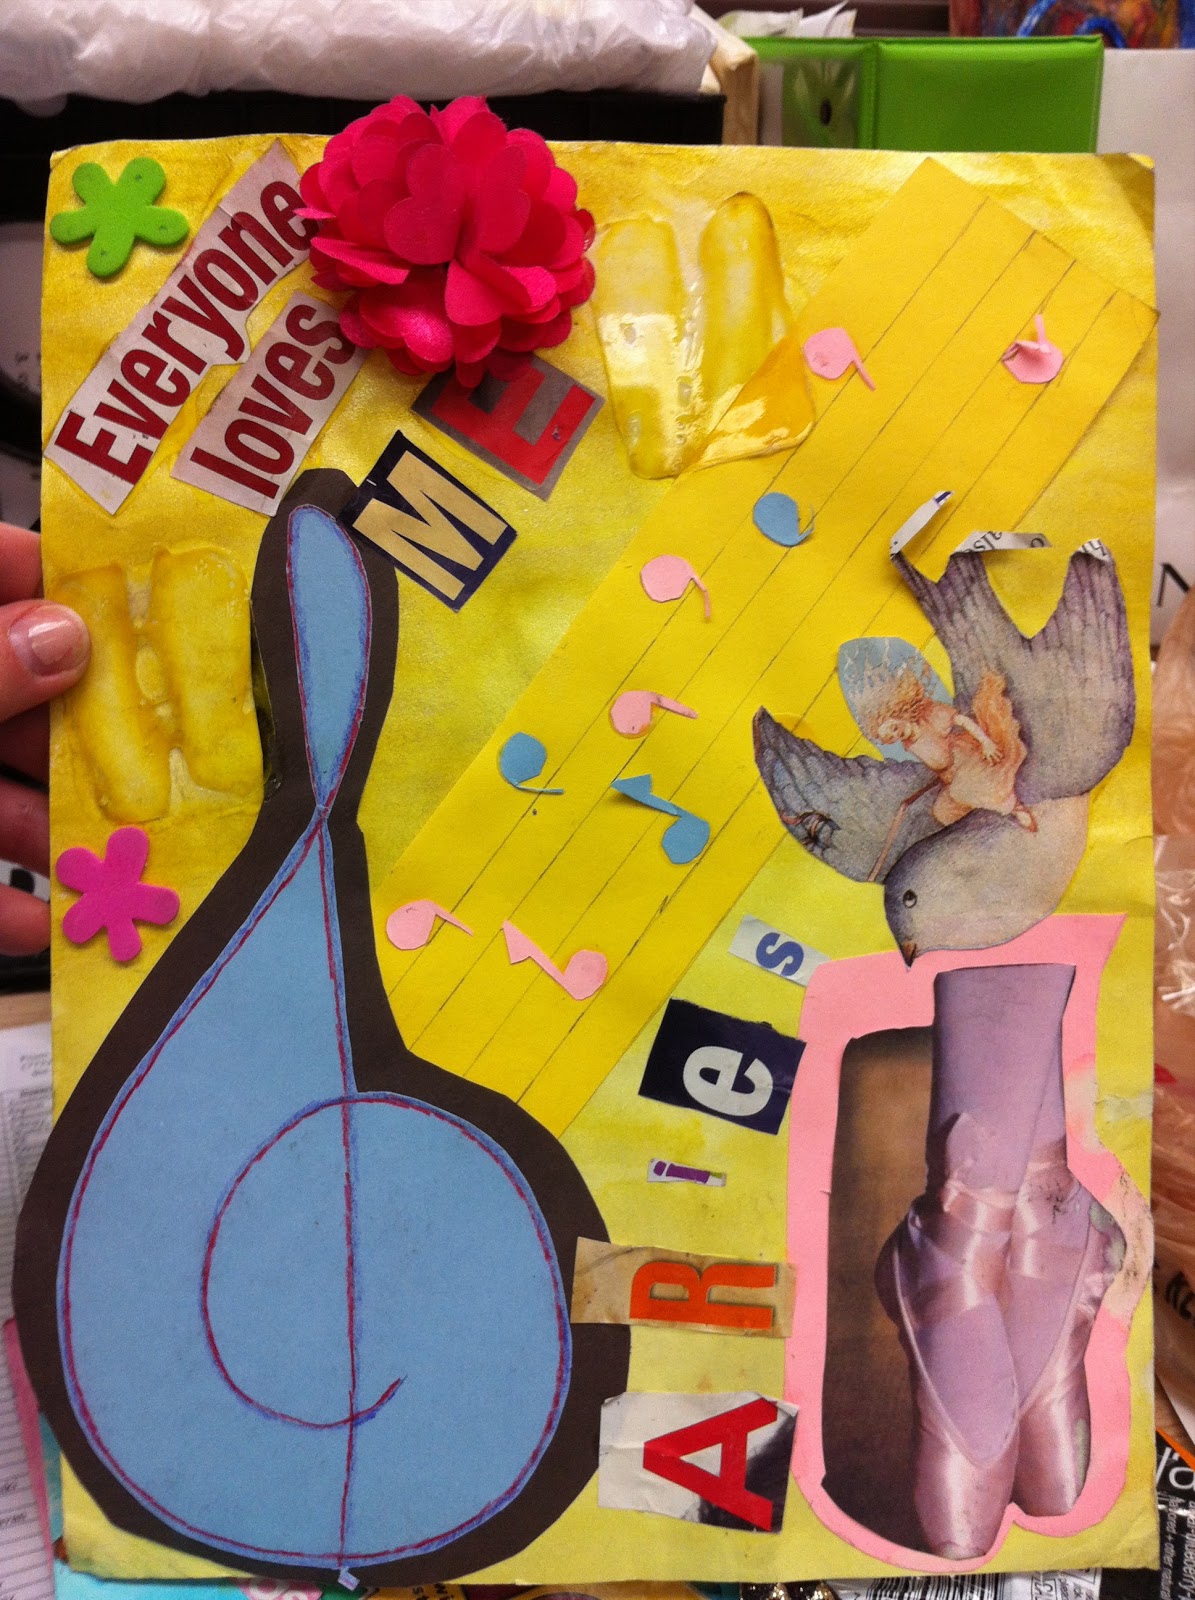 Project ART-A-DAY: Lesson: Elements and Identity Sketchbook Cover